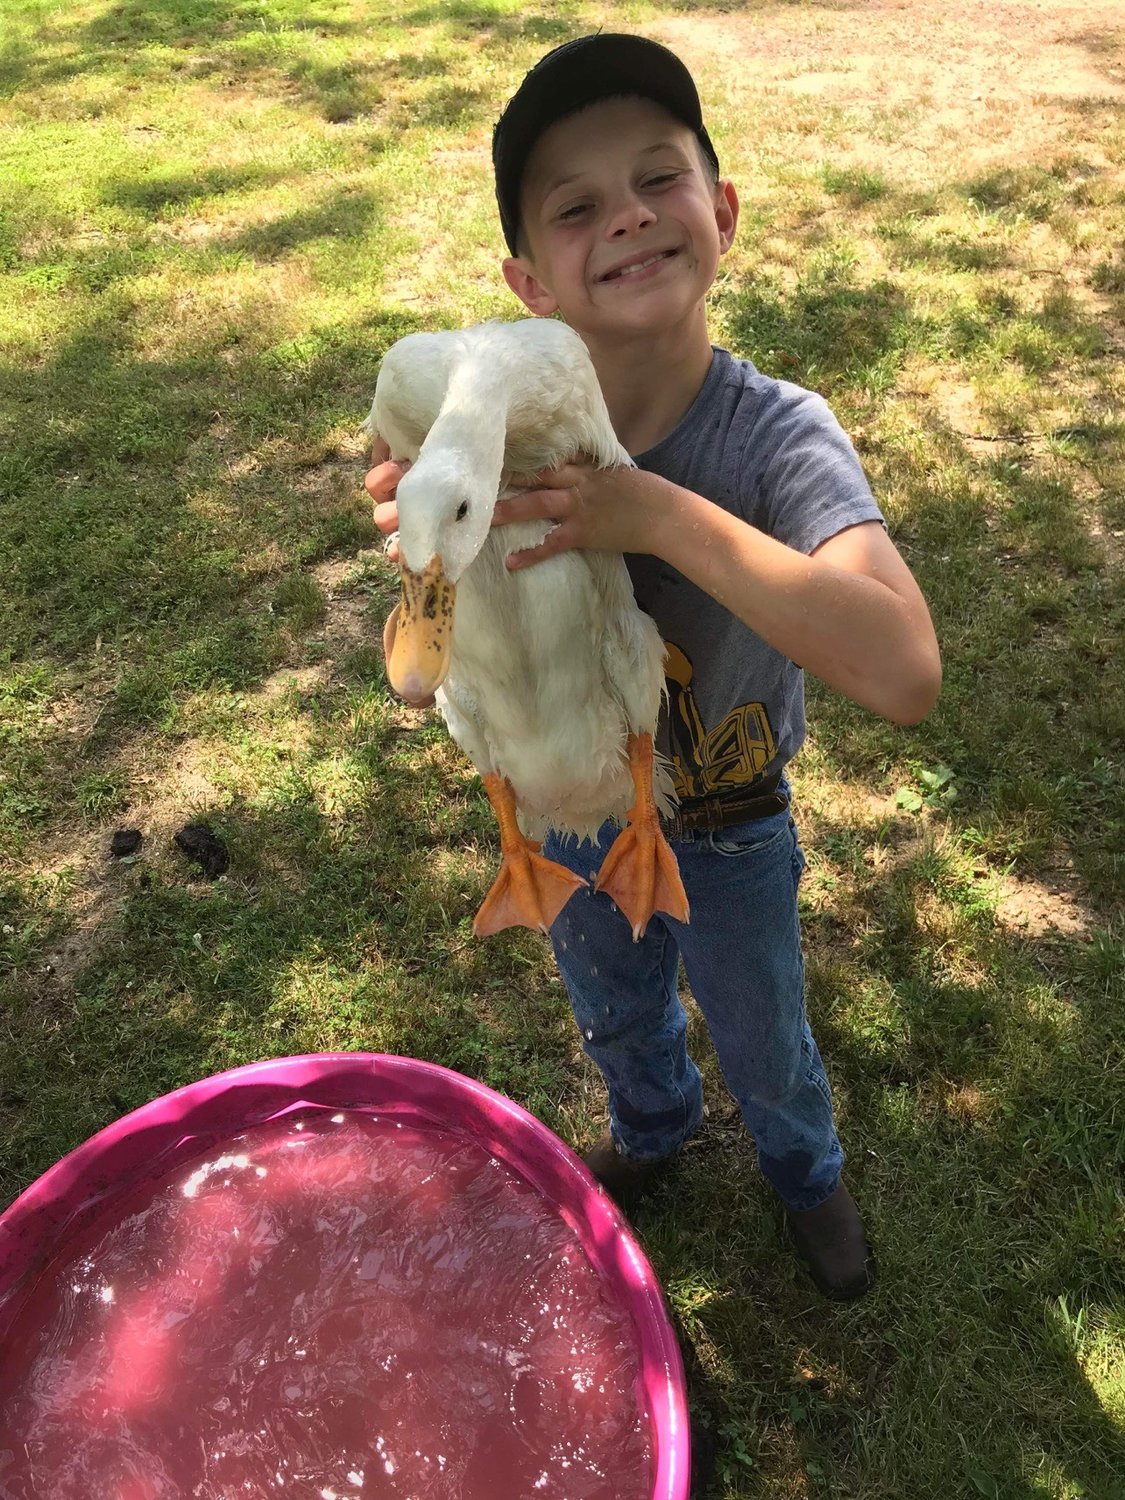 Evan stops from bathing his duck to pose for the camera.